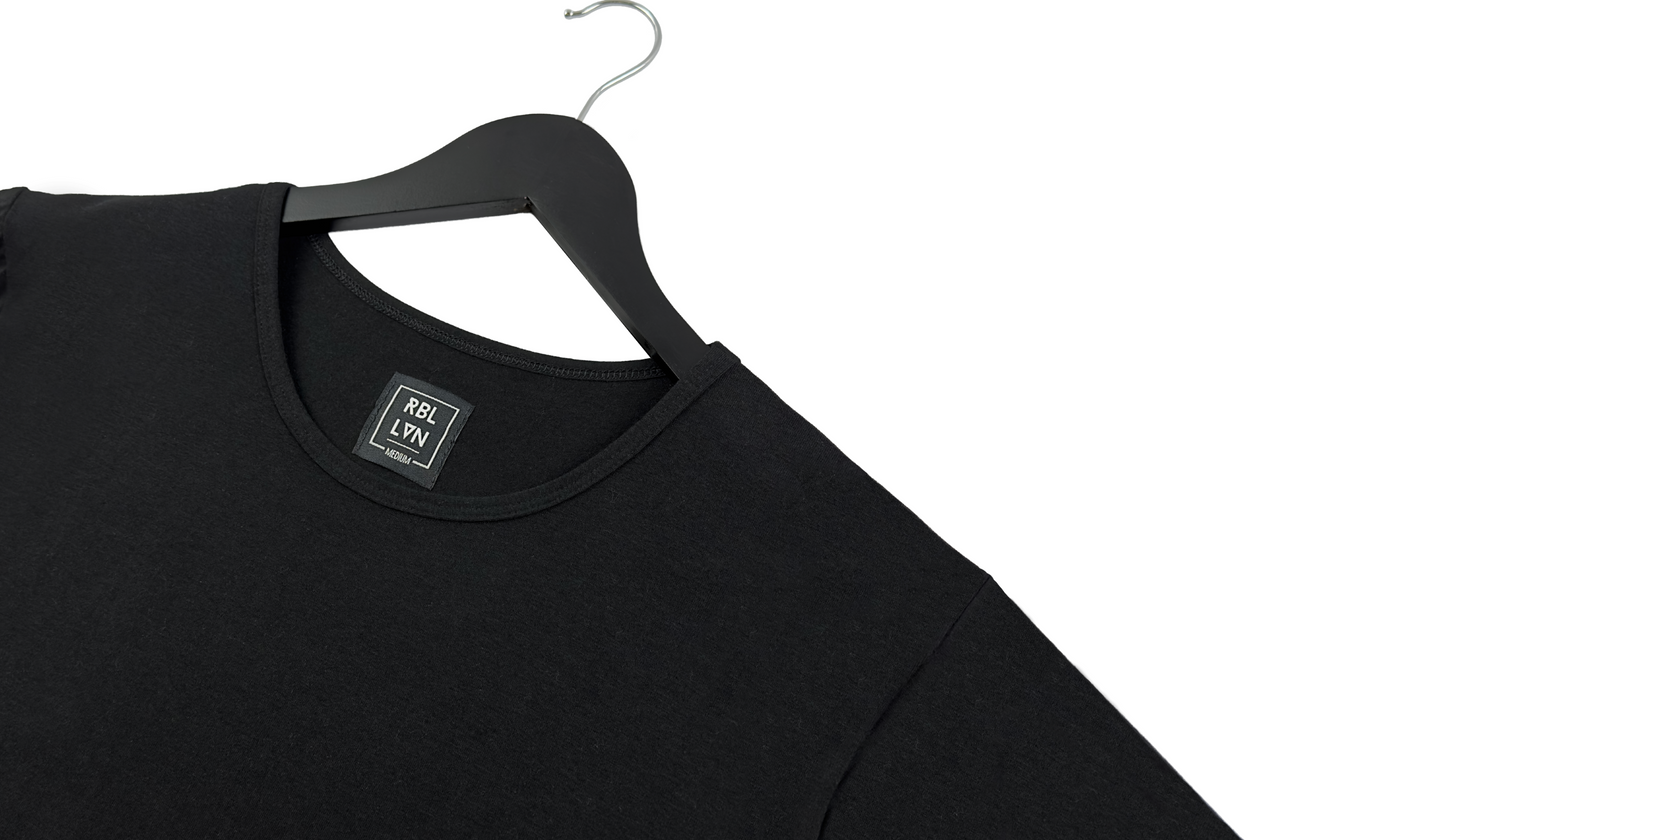 onyx black rebellivn t-shirt that is longline, curved hem, soft, and fitted